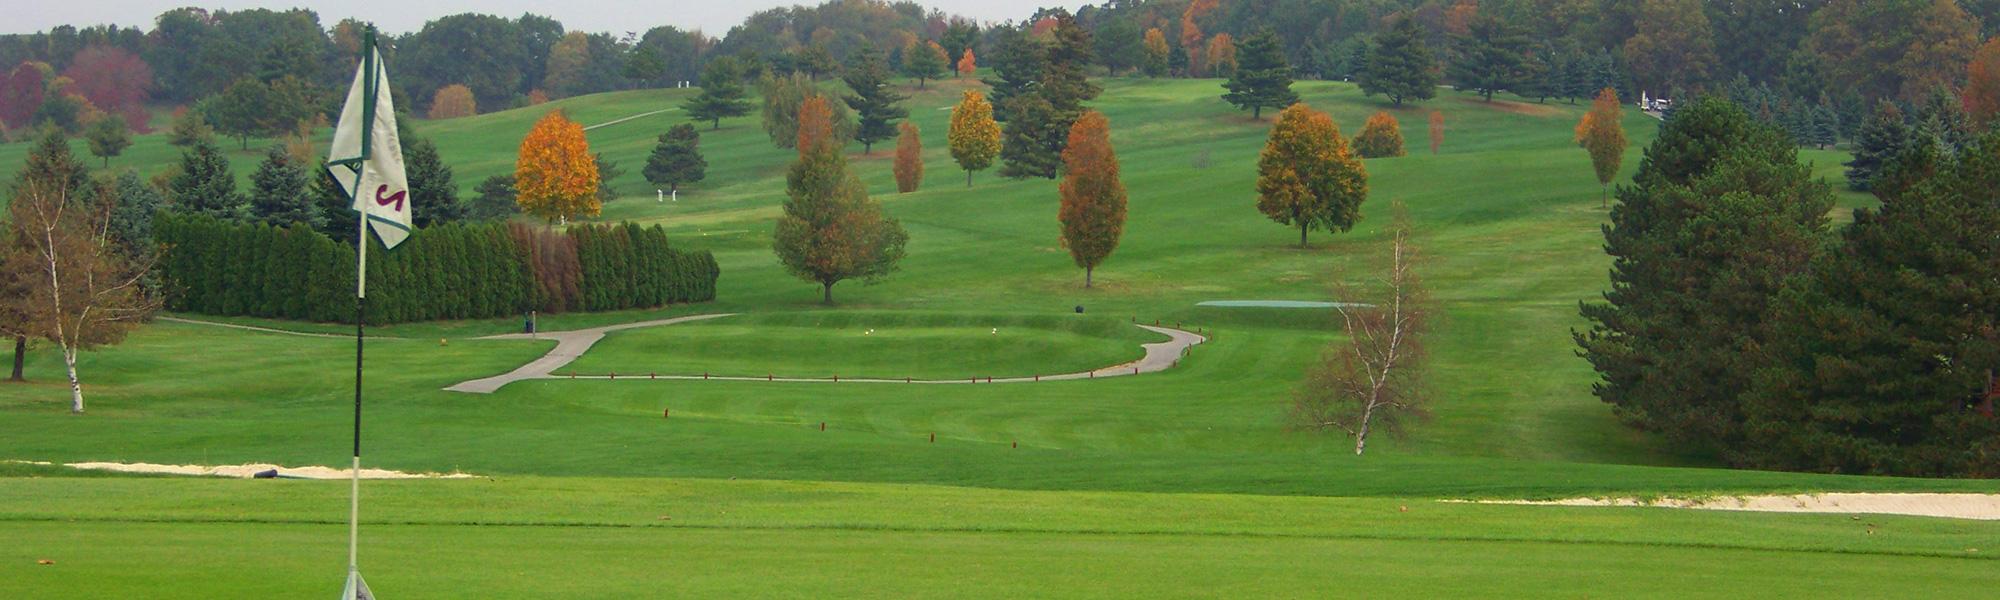 Rolling Acres Golf Course Beaver Falls PA